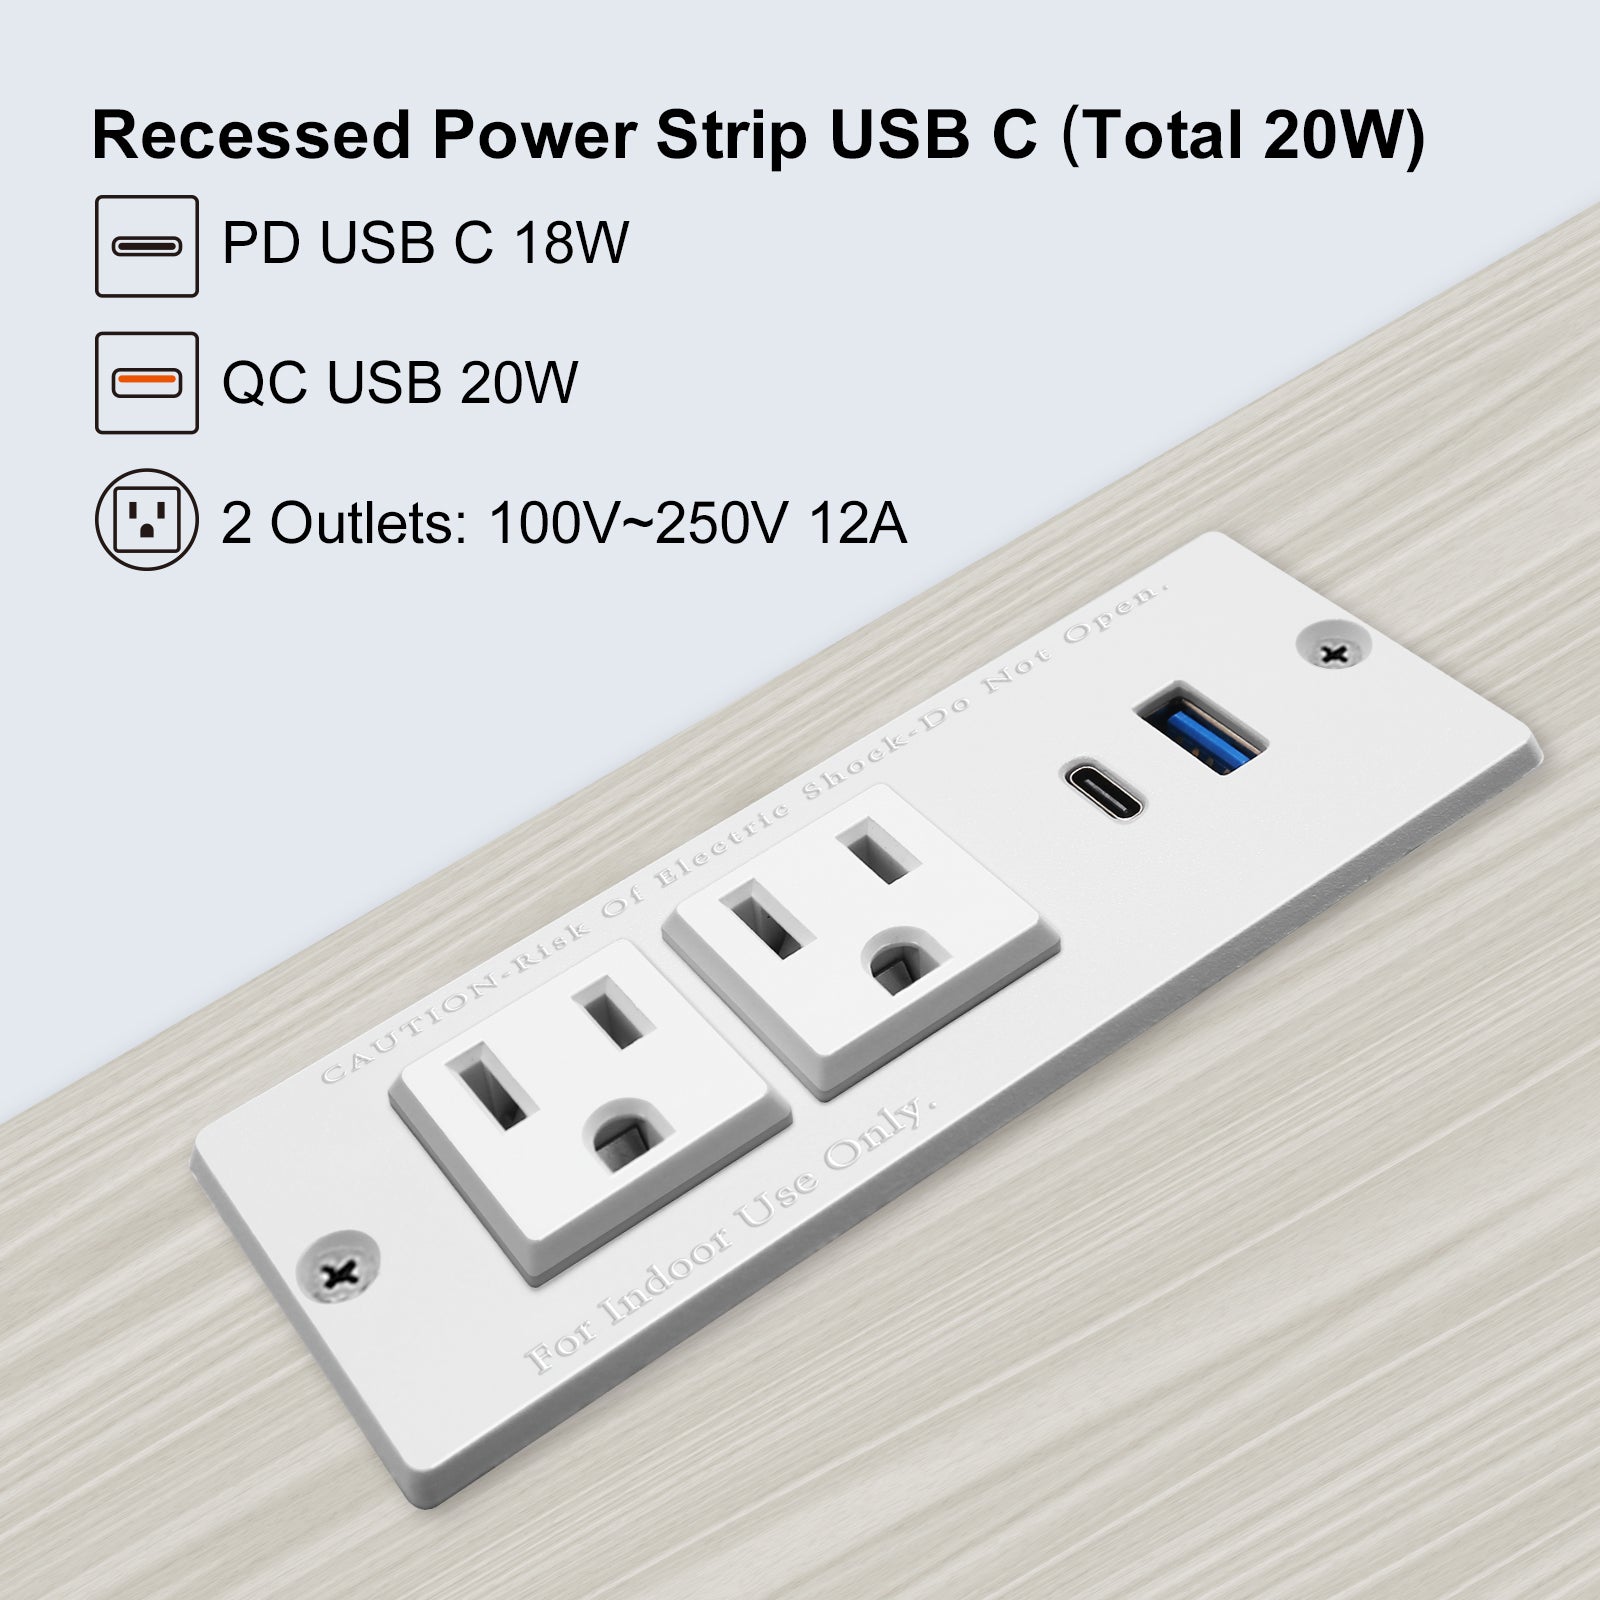 USB C Desk Recessed Power Strip Fast Charge Desktop Power Station 2 Outlets 2 USB (PD20W & QC18W, Total 20W) Mountable Flat Plug Extension Cord Mount for Tabletop Sofa Cabinet Nightstand